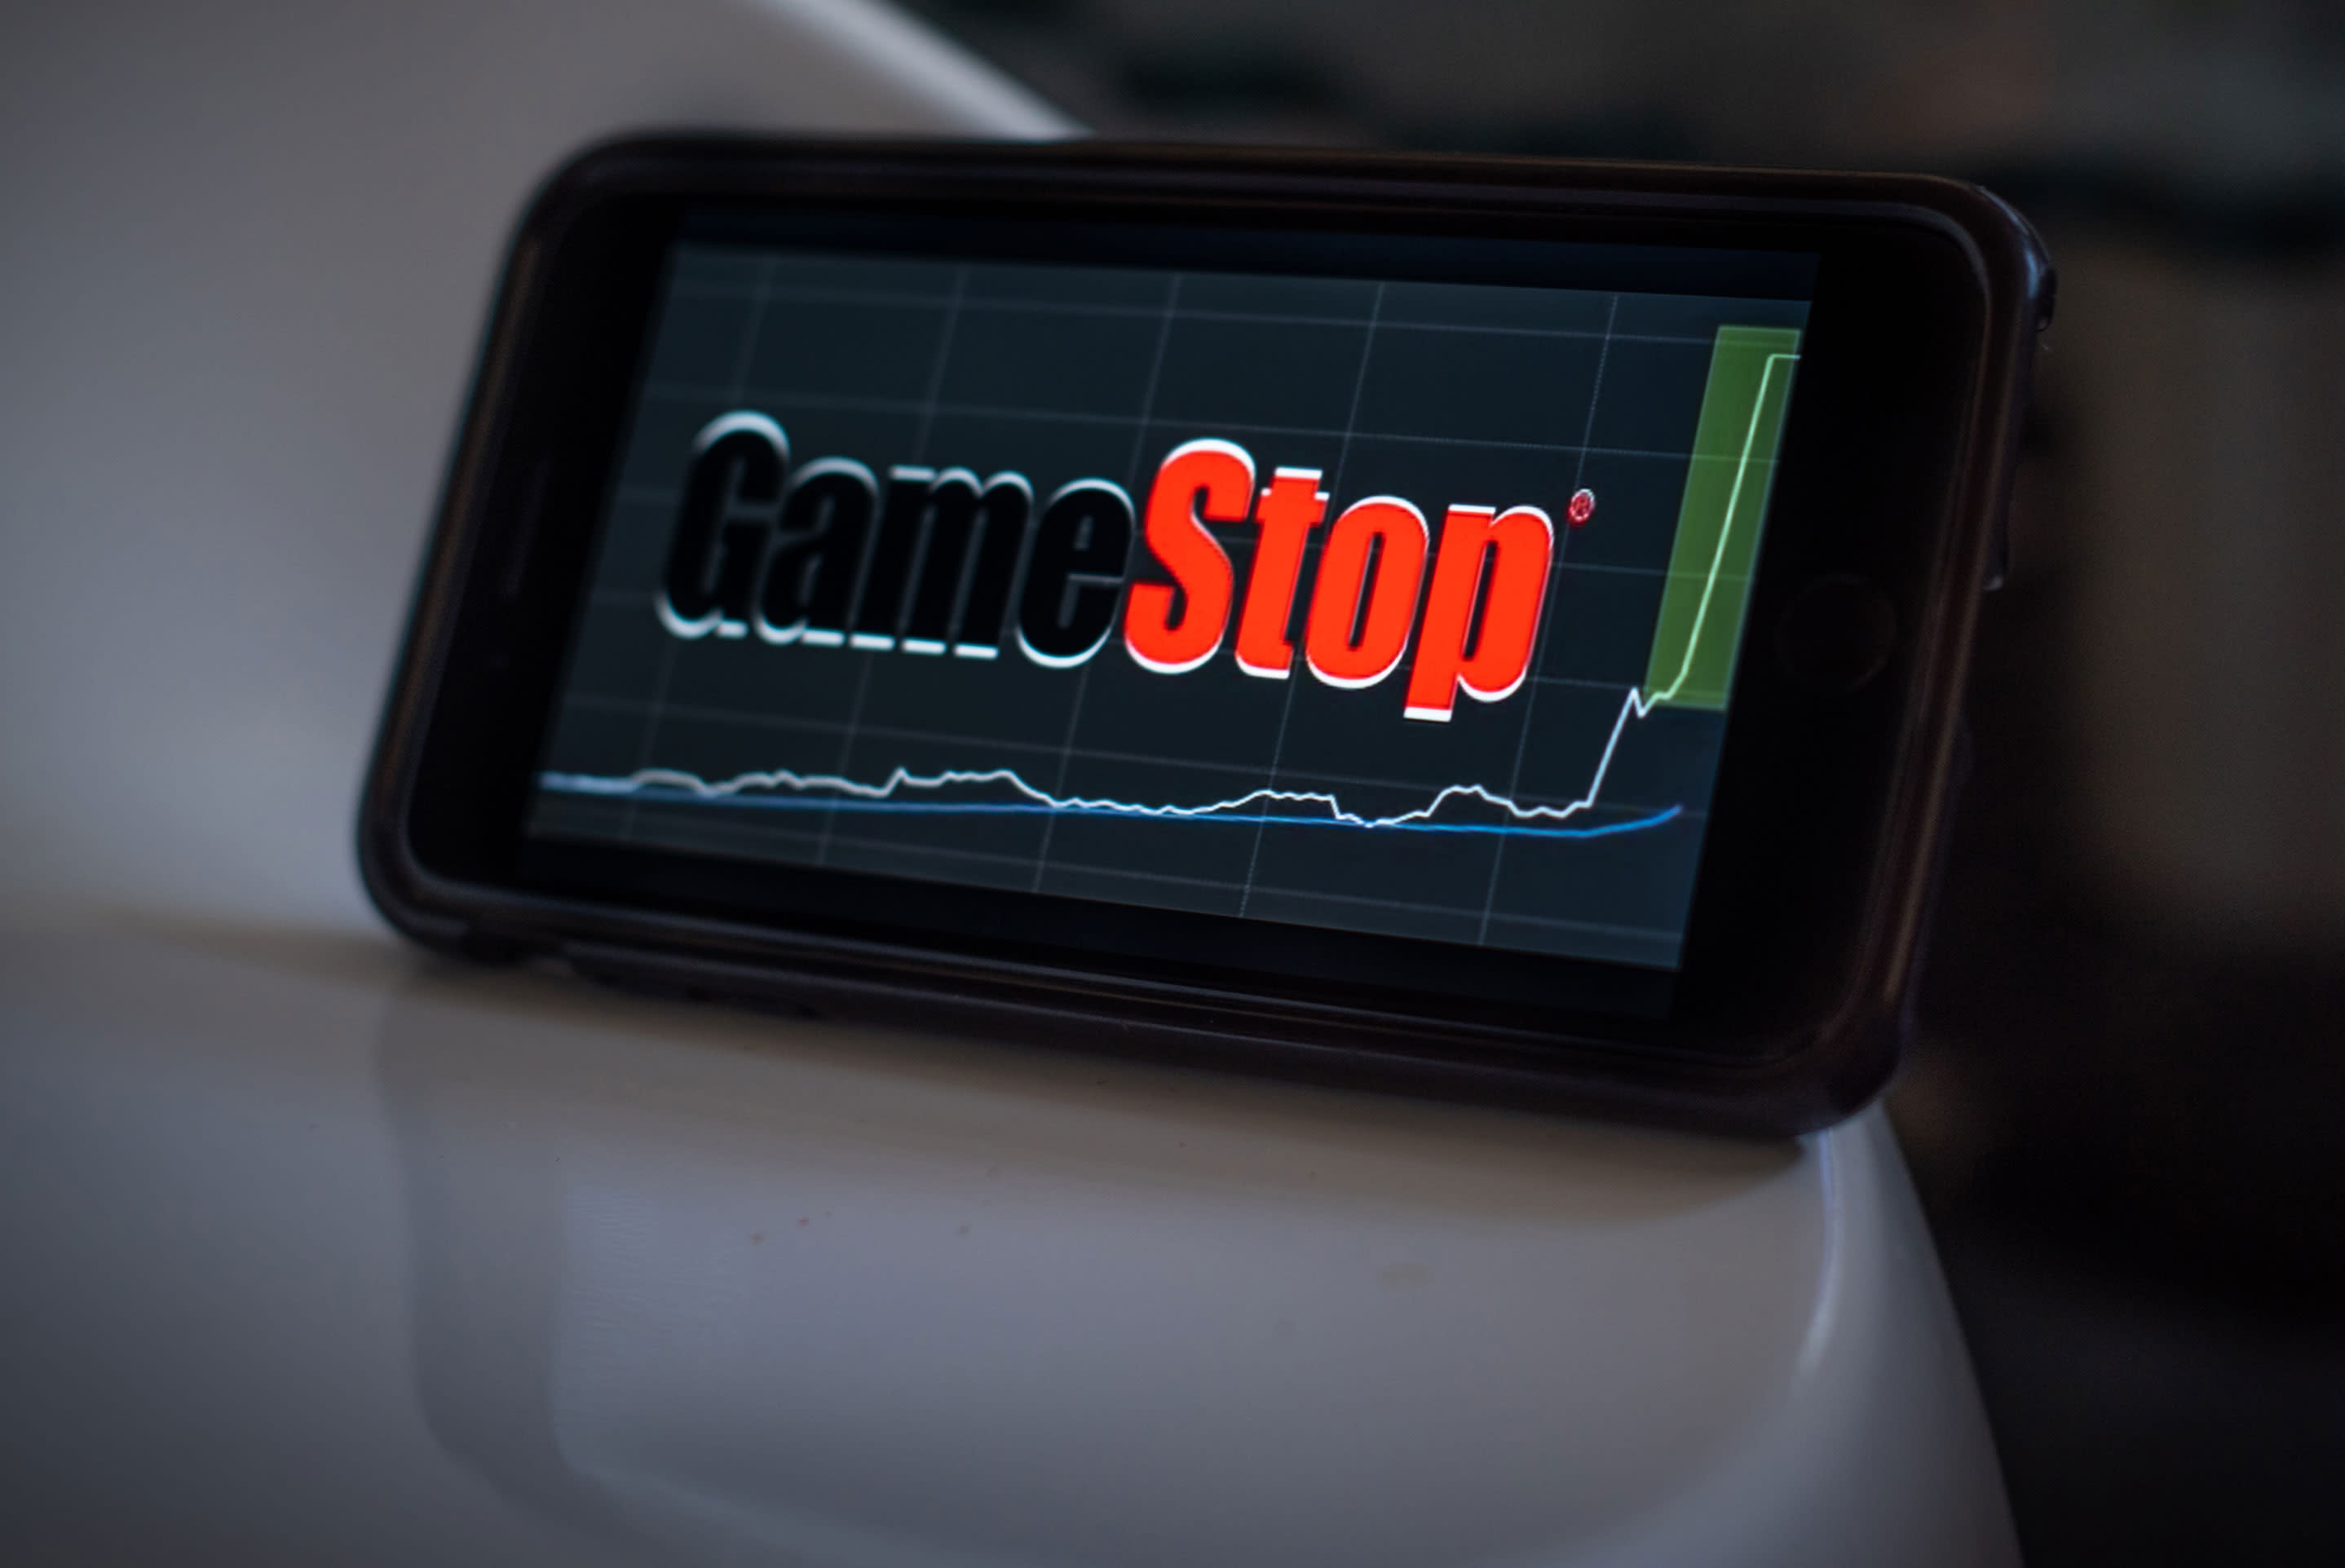 GameStop’s shares plummet as the company says it can sell shares to finance the transformation